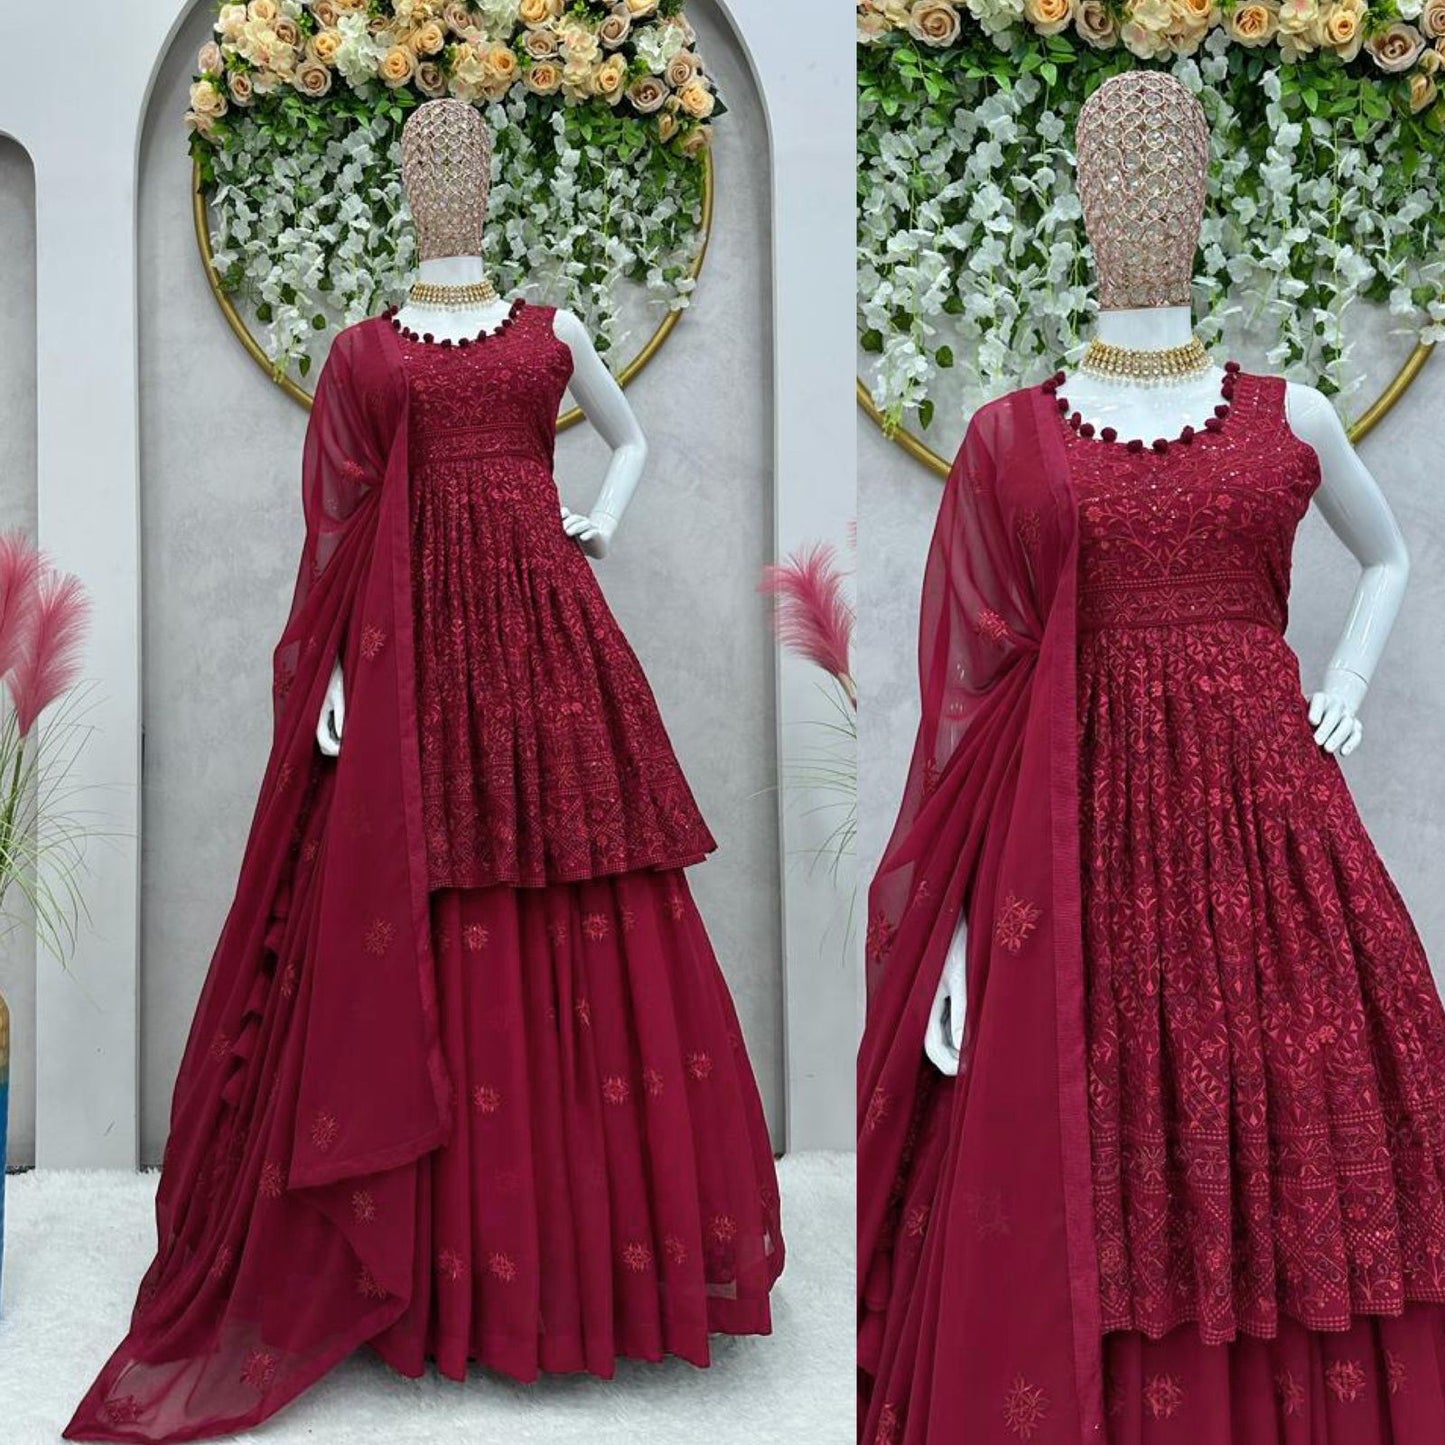 Trending Marron Colour Embroidary And Sequence Work Top Lehenga With Duppta